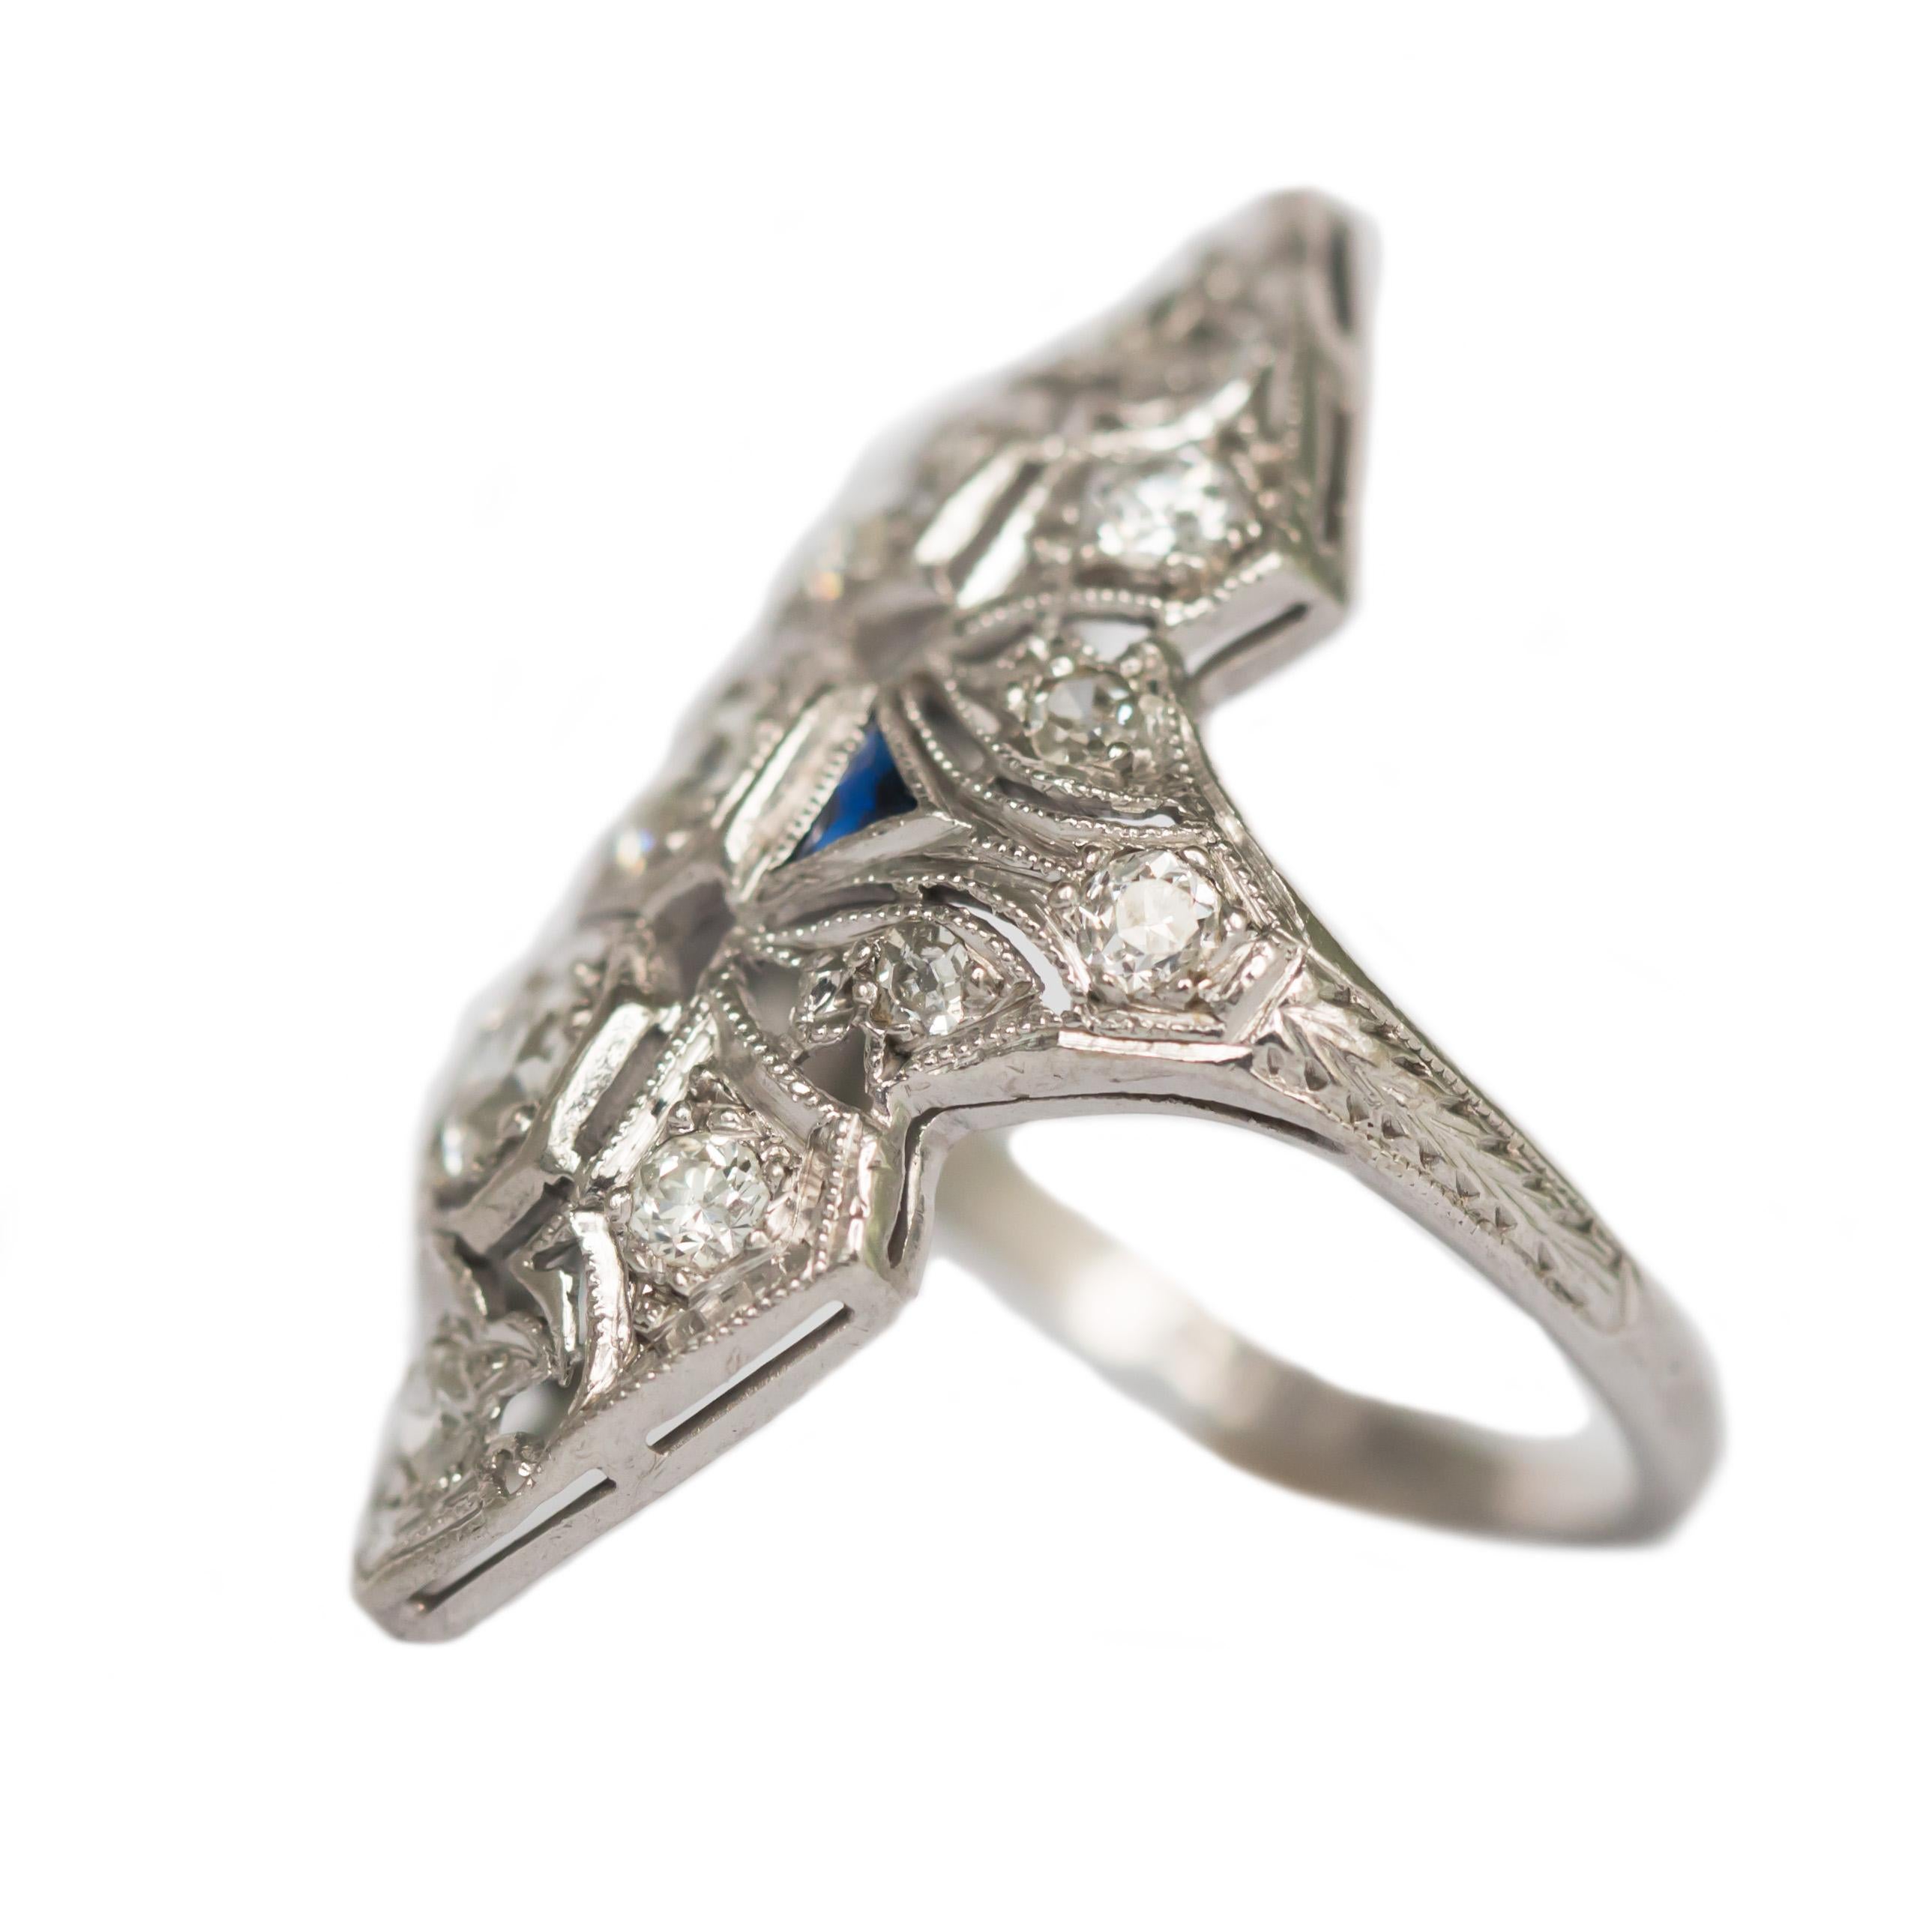 Ring Size: 5.5
Metal Type: Platinum
Weight: 5.2 grams

Center Diamond Details
Shape: Old European Brilliant 
Carat Weight: 1.00 carat, total weight
Color: I/J
Clarity: VS

Side Stone Details: 
Type: Natural Sapphire
Shape: Triangle Cut 
Total Carat